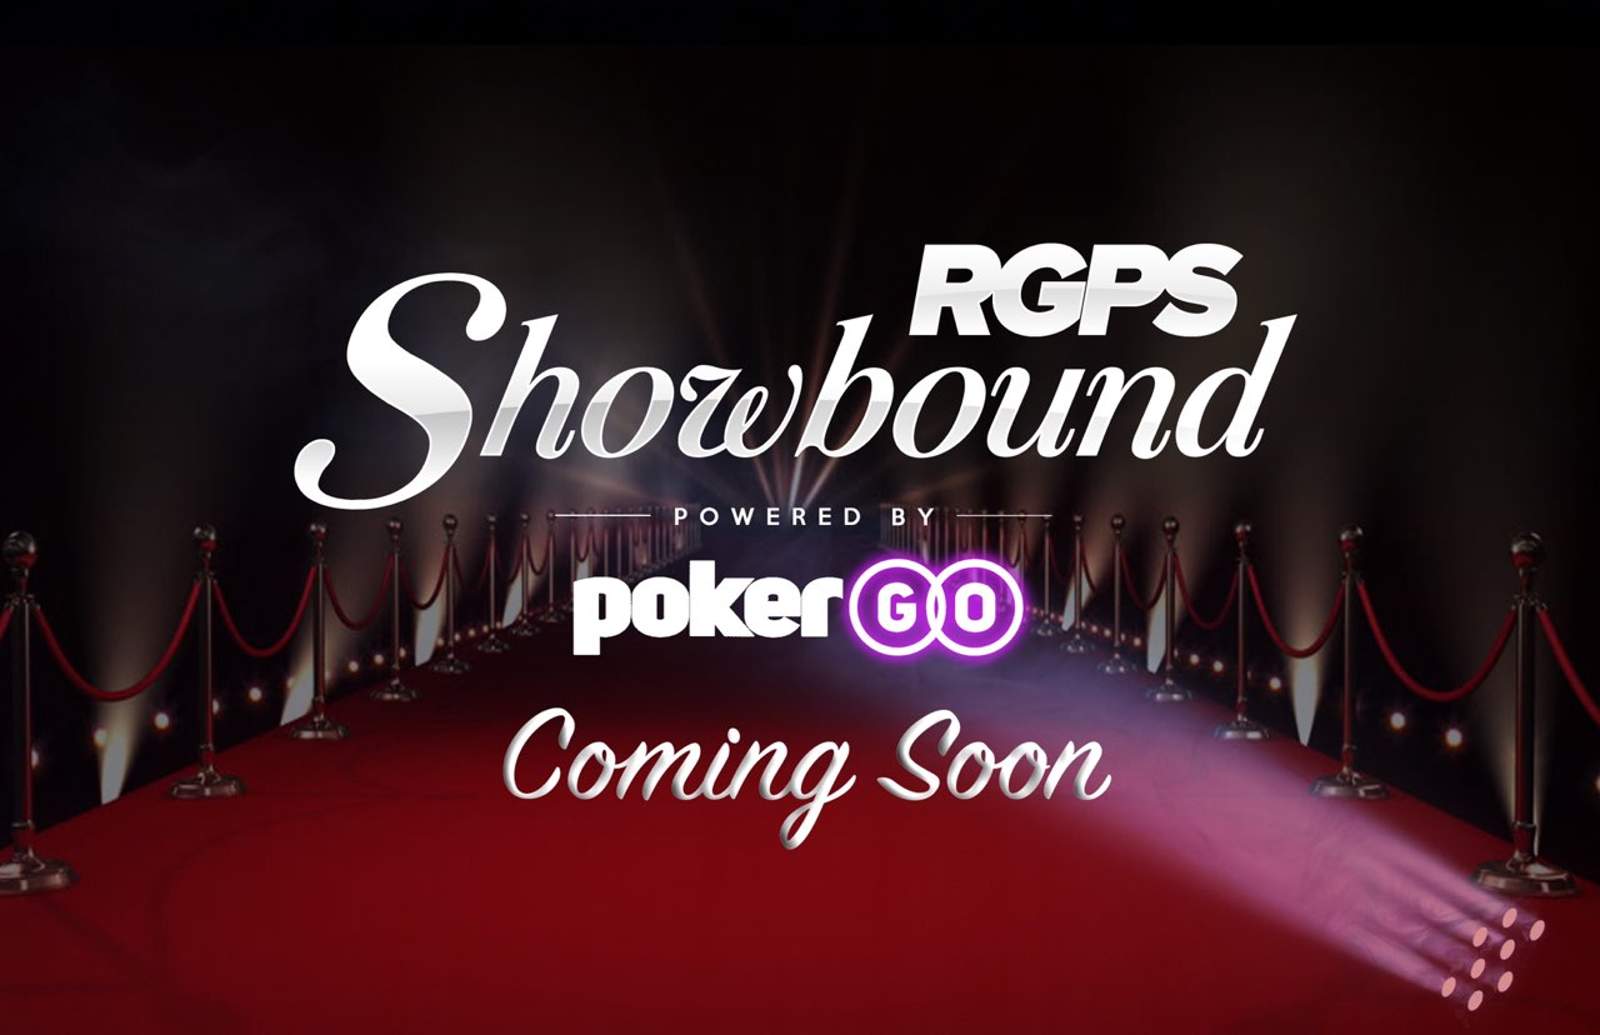 Poker Central and RunGood Poker Series Announce 2019 Partnership for "Showbound"